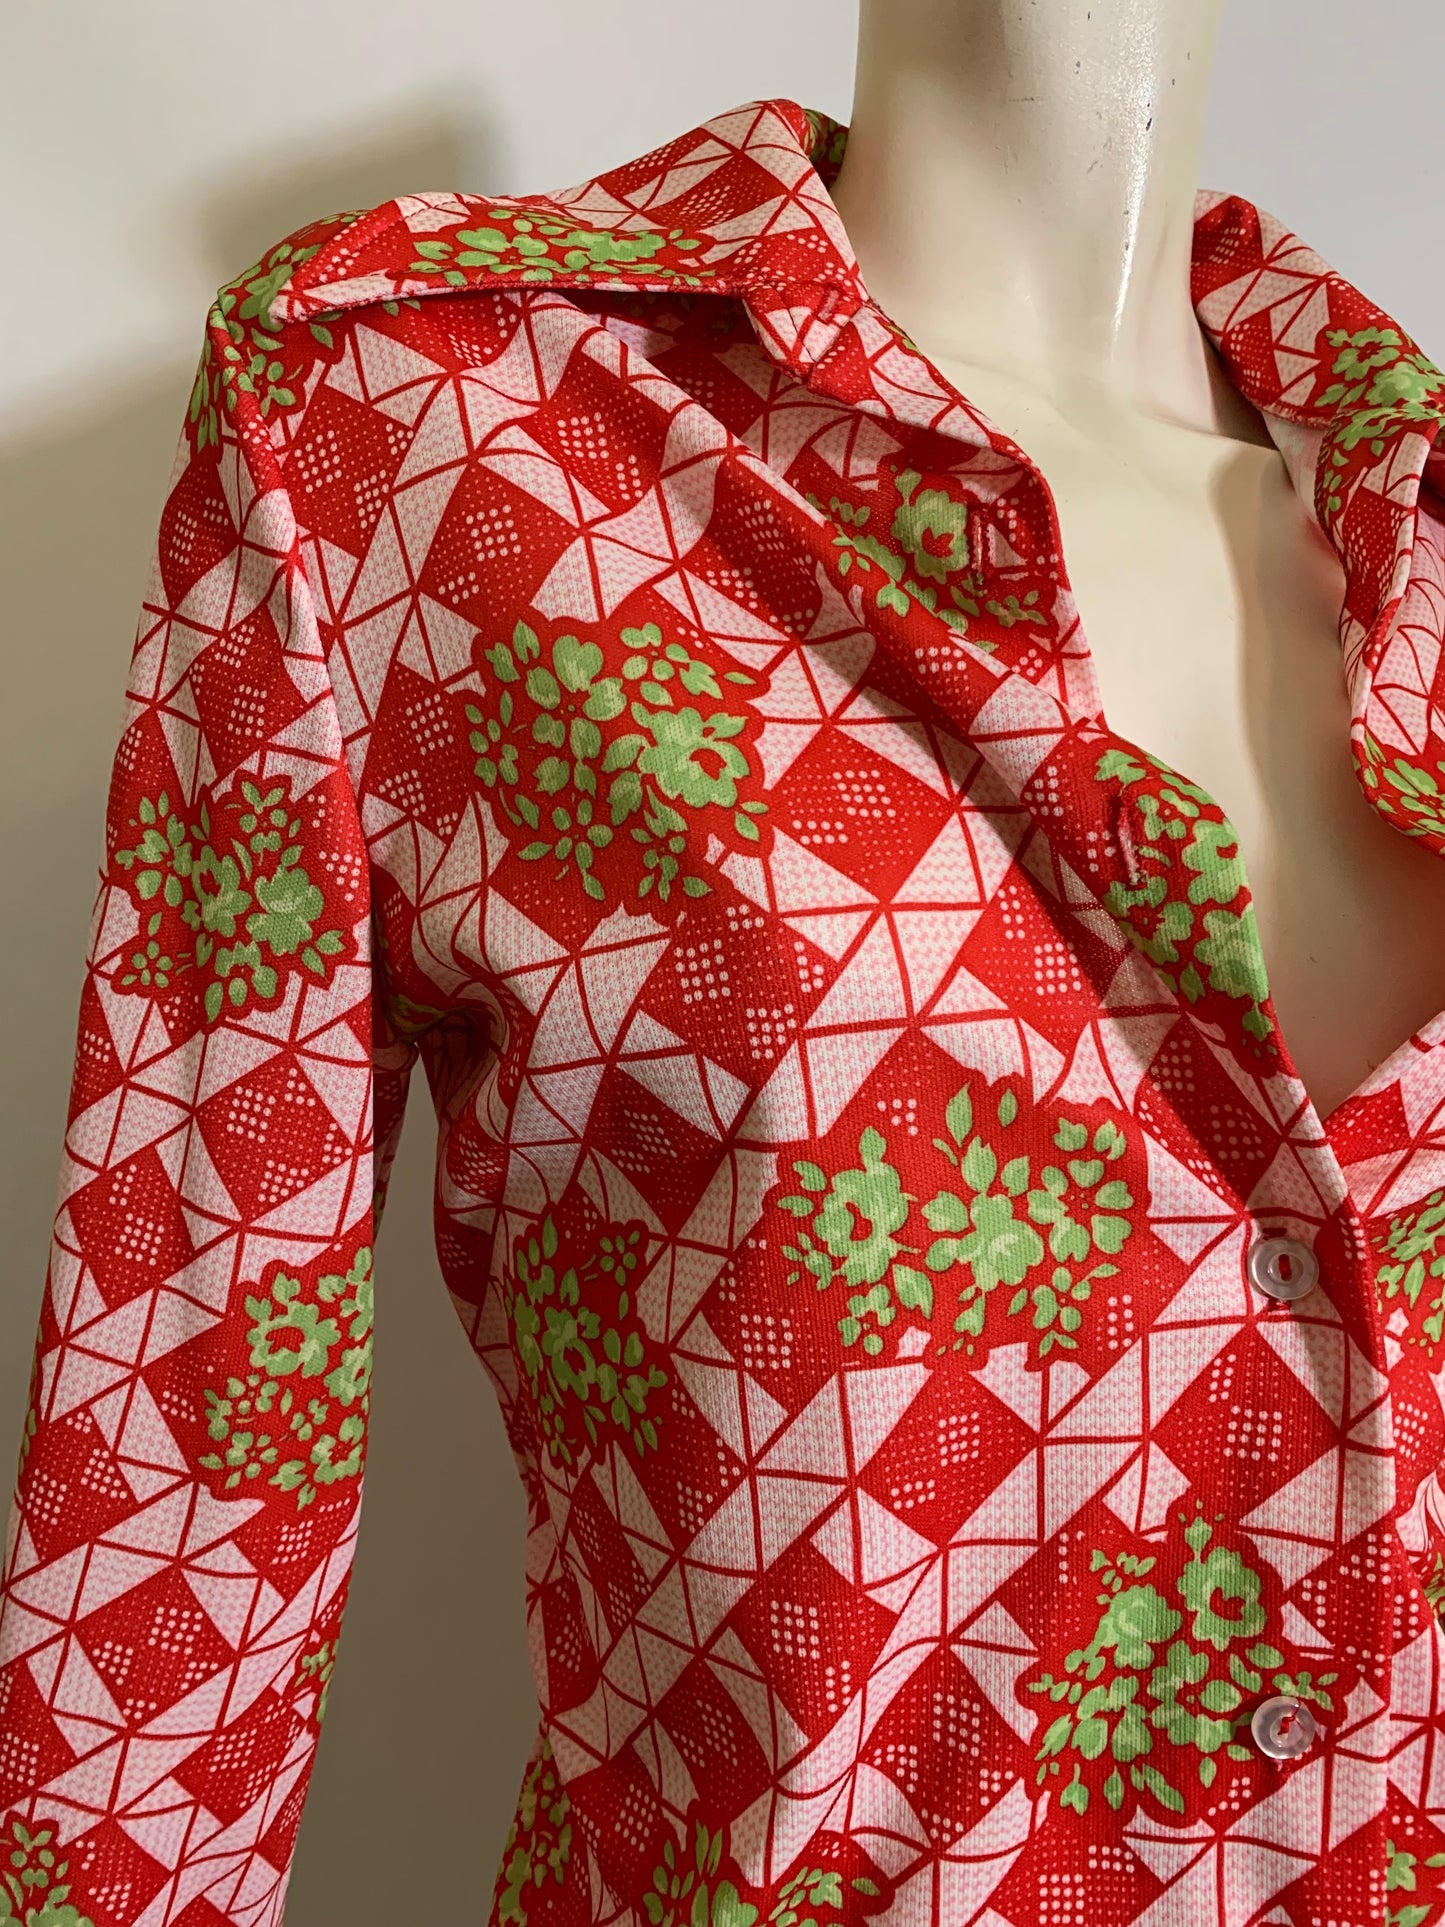 Red and Green Hydrangea Print Polyester Blouse circa 1970s